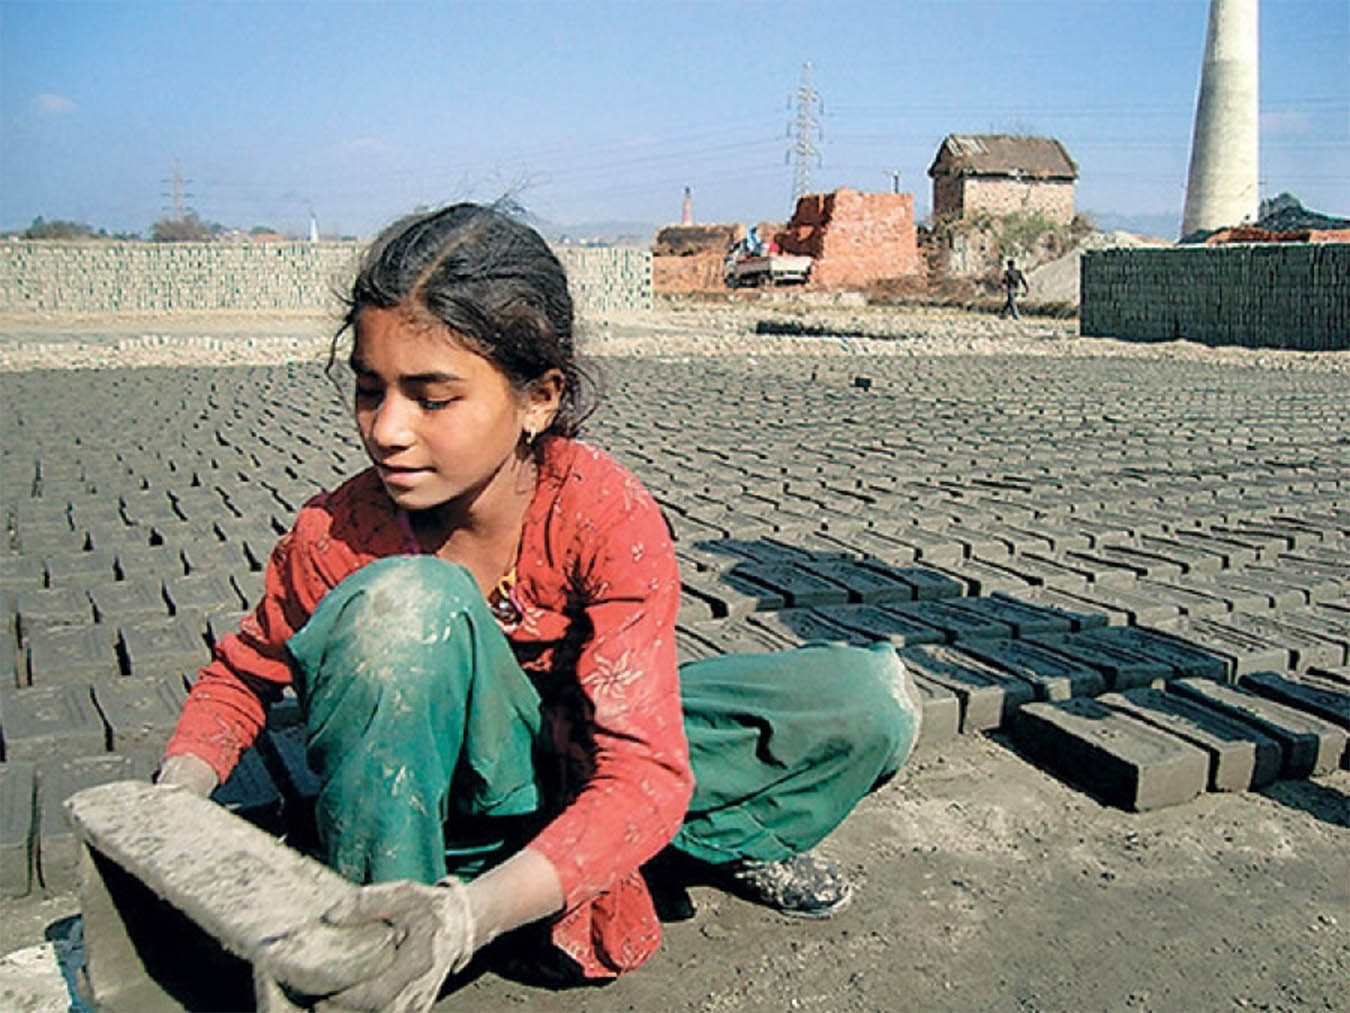 essay on child labour in nepal